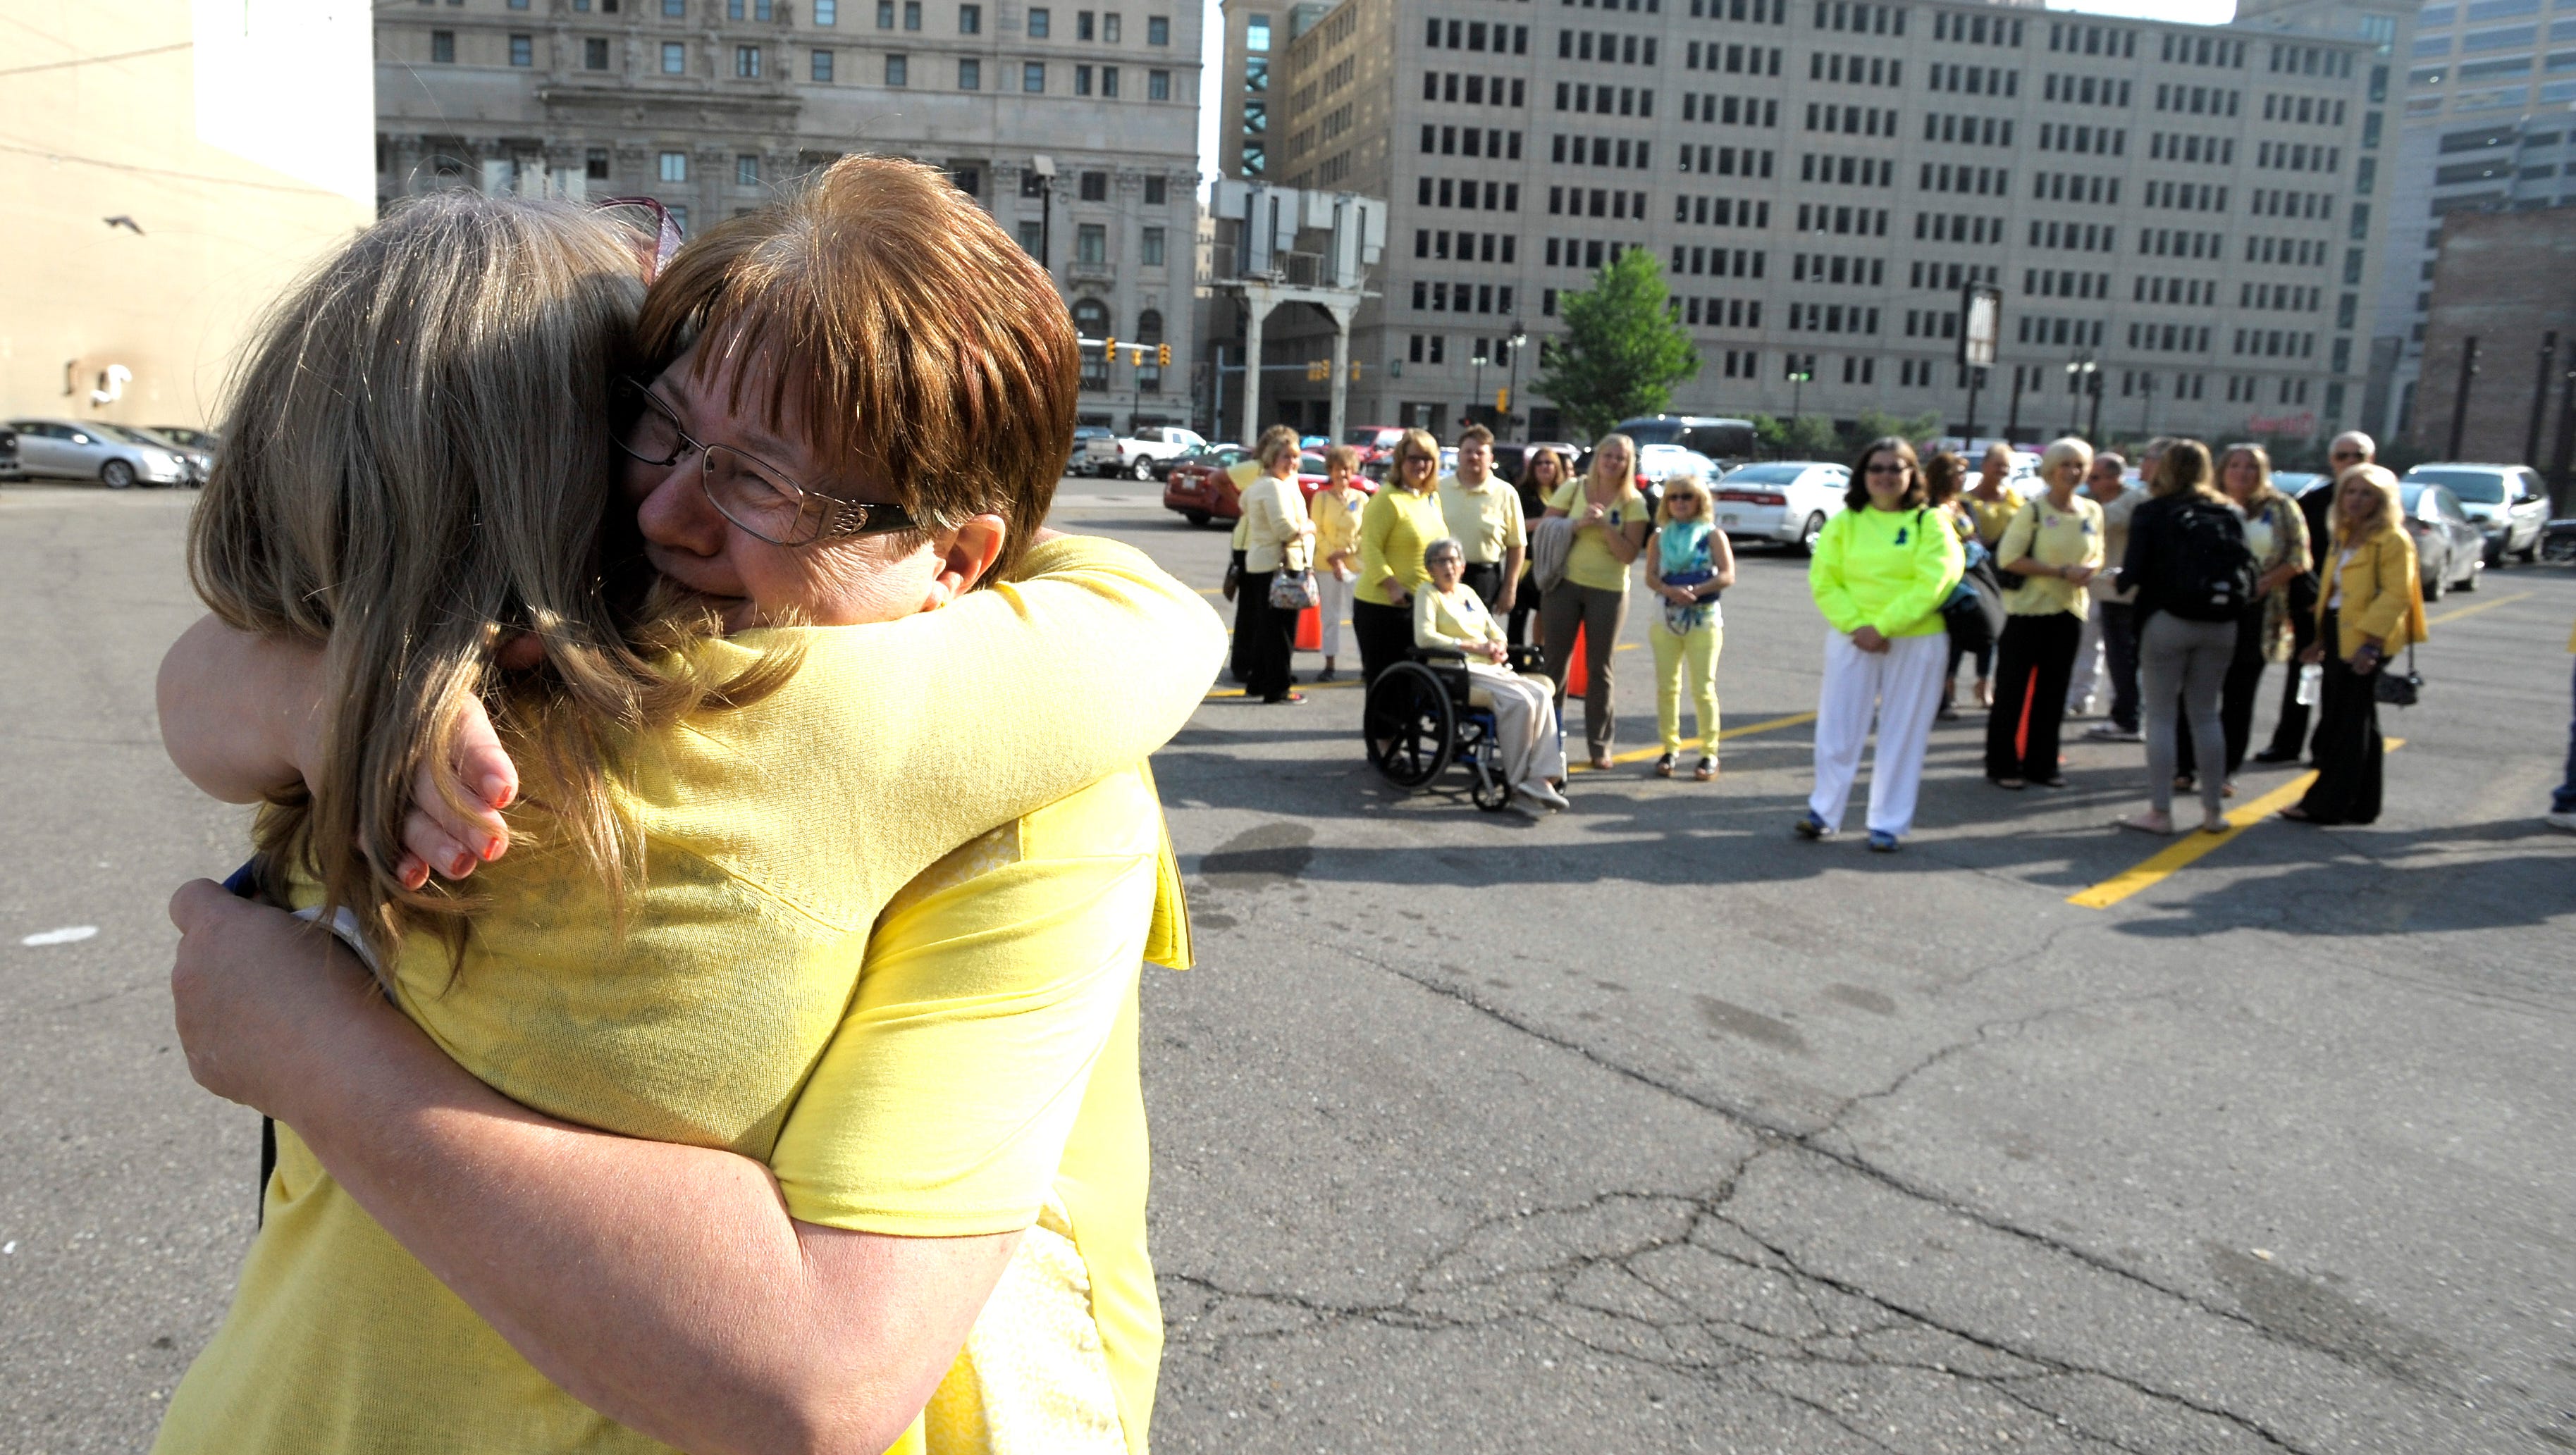 Donna Adams, left, 54, of Romeo, whose father-in-law, Rudy Adams, was a patient of Fata's and is still alive, hugs Geraldine Parkin, right, 54, of Davison, whose husband, Tim, was overtreated by Fata and is still alive.